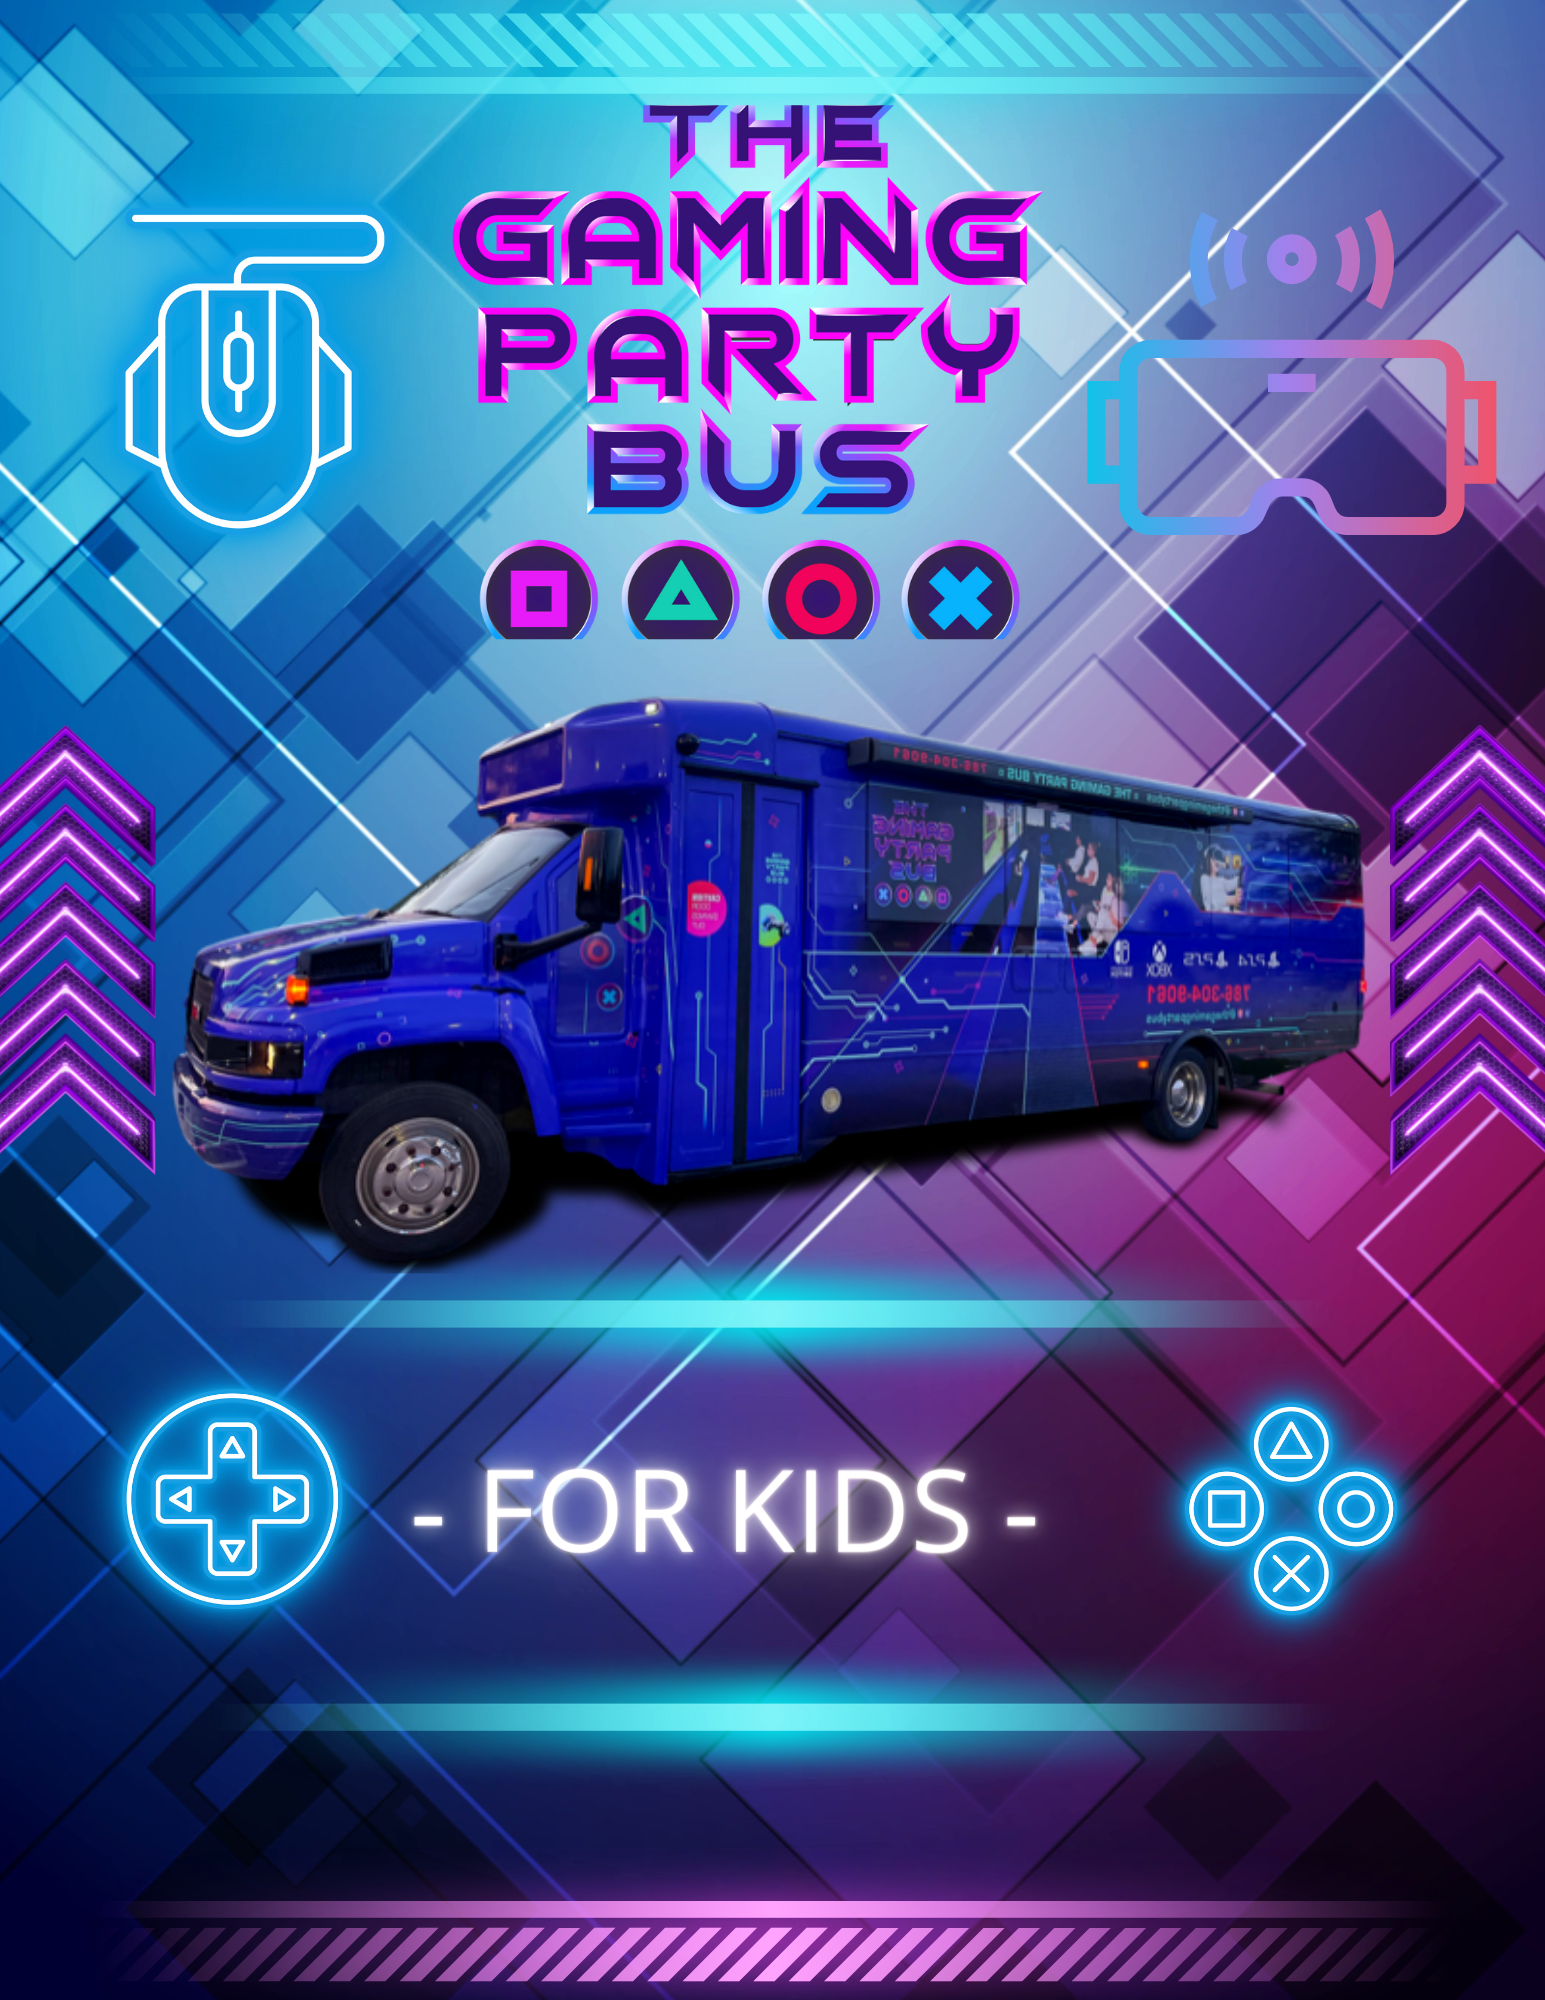 Bus Games: Play Bus Games on LittleGames for free